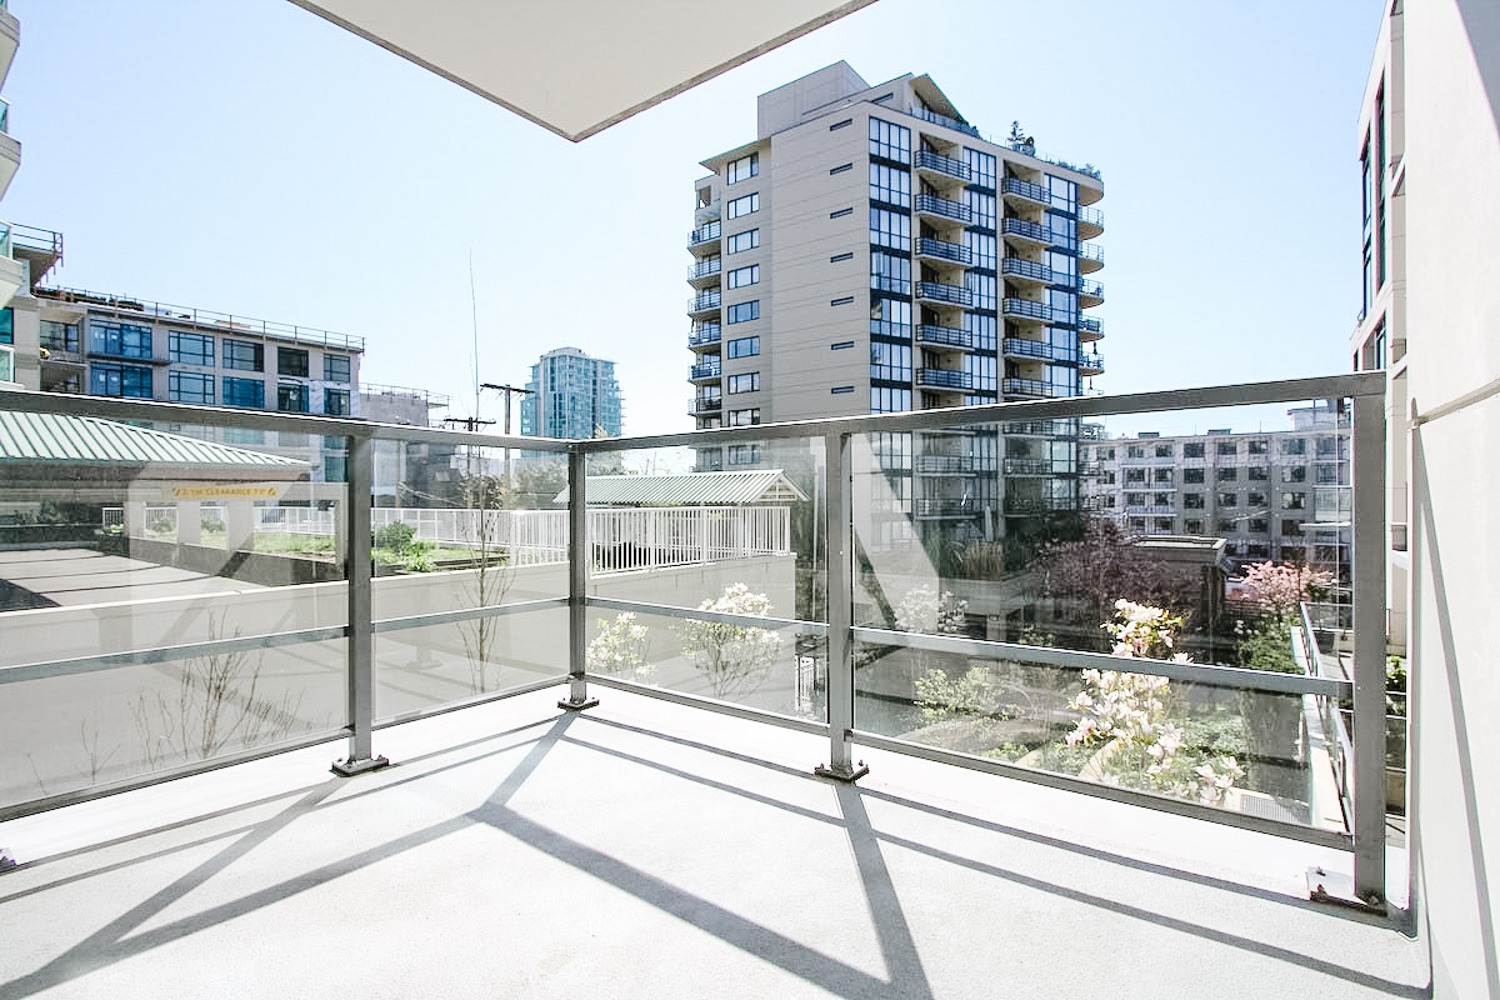 one-bedroom-condo-for-rent-in-lower-lonsdale-north-vancouver-5